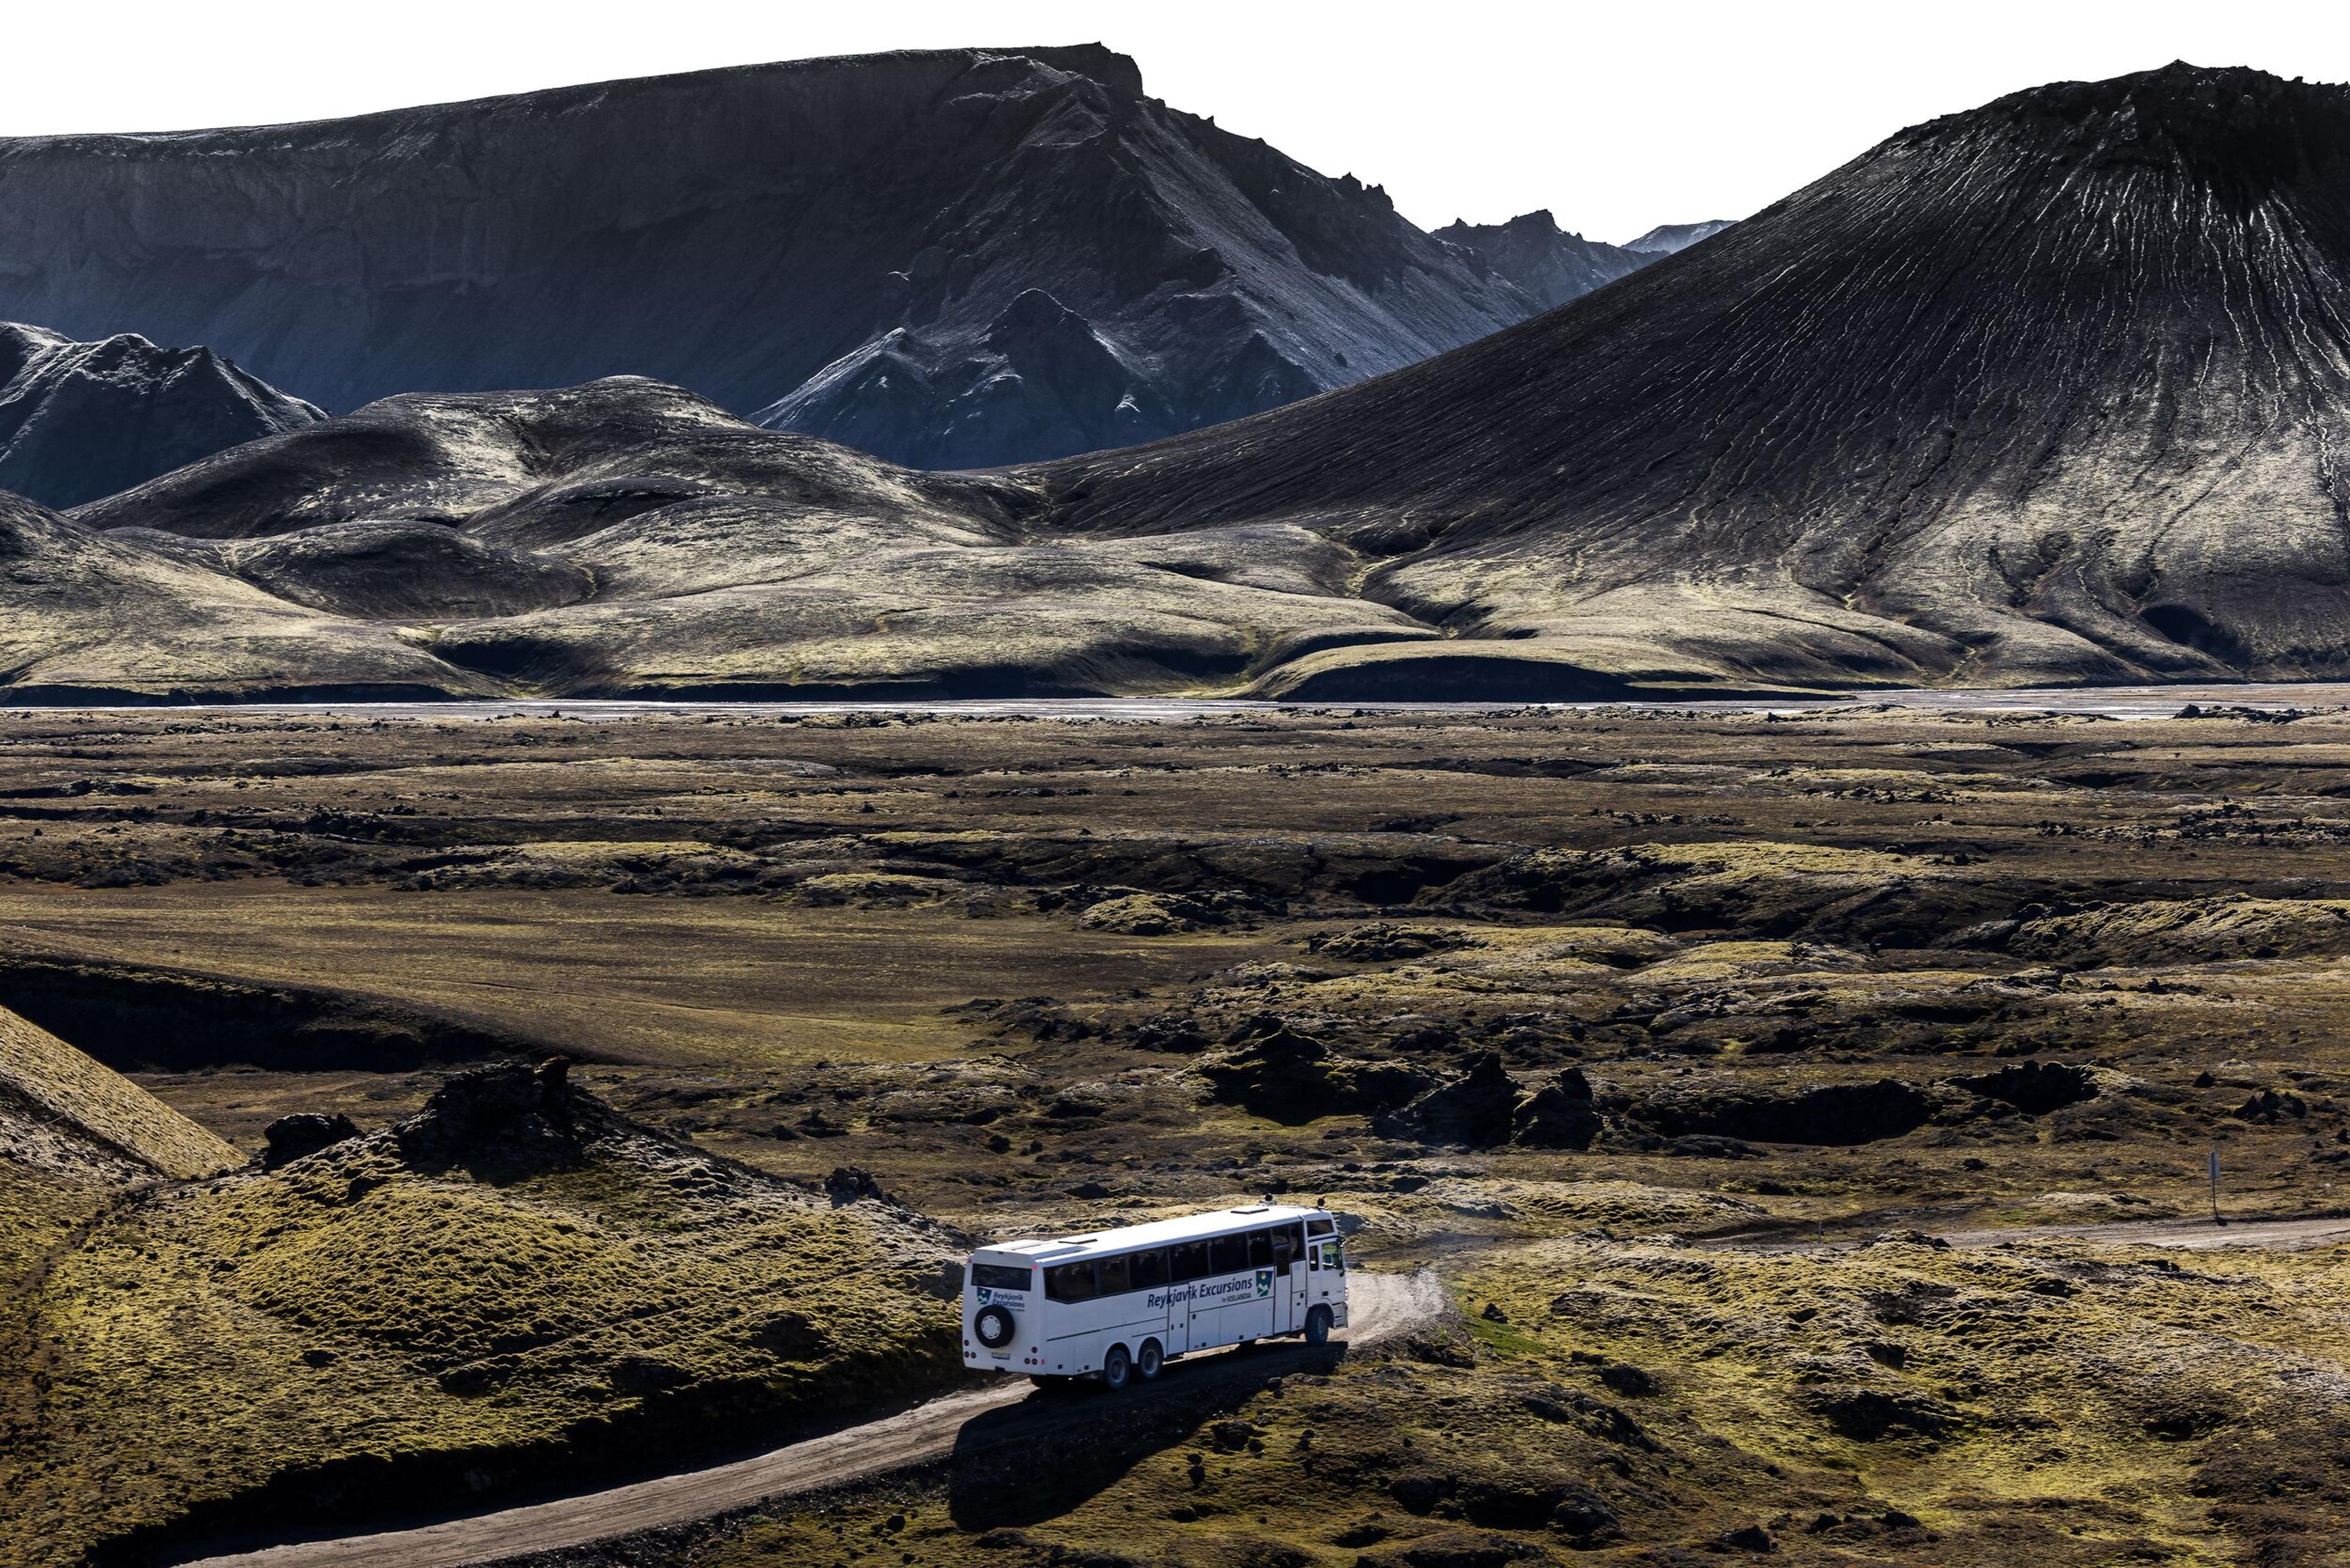 A specialized Highland bus navigating the rugged, unpaved roads of the wilderness.